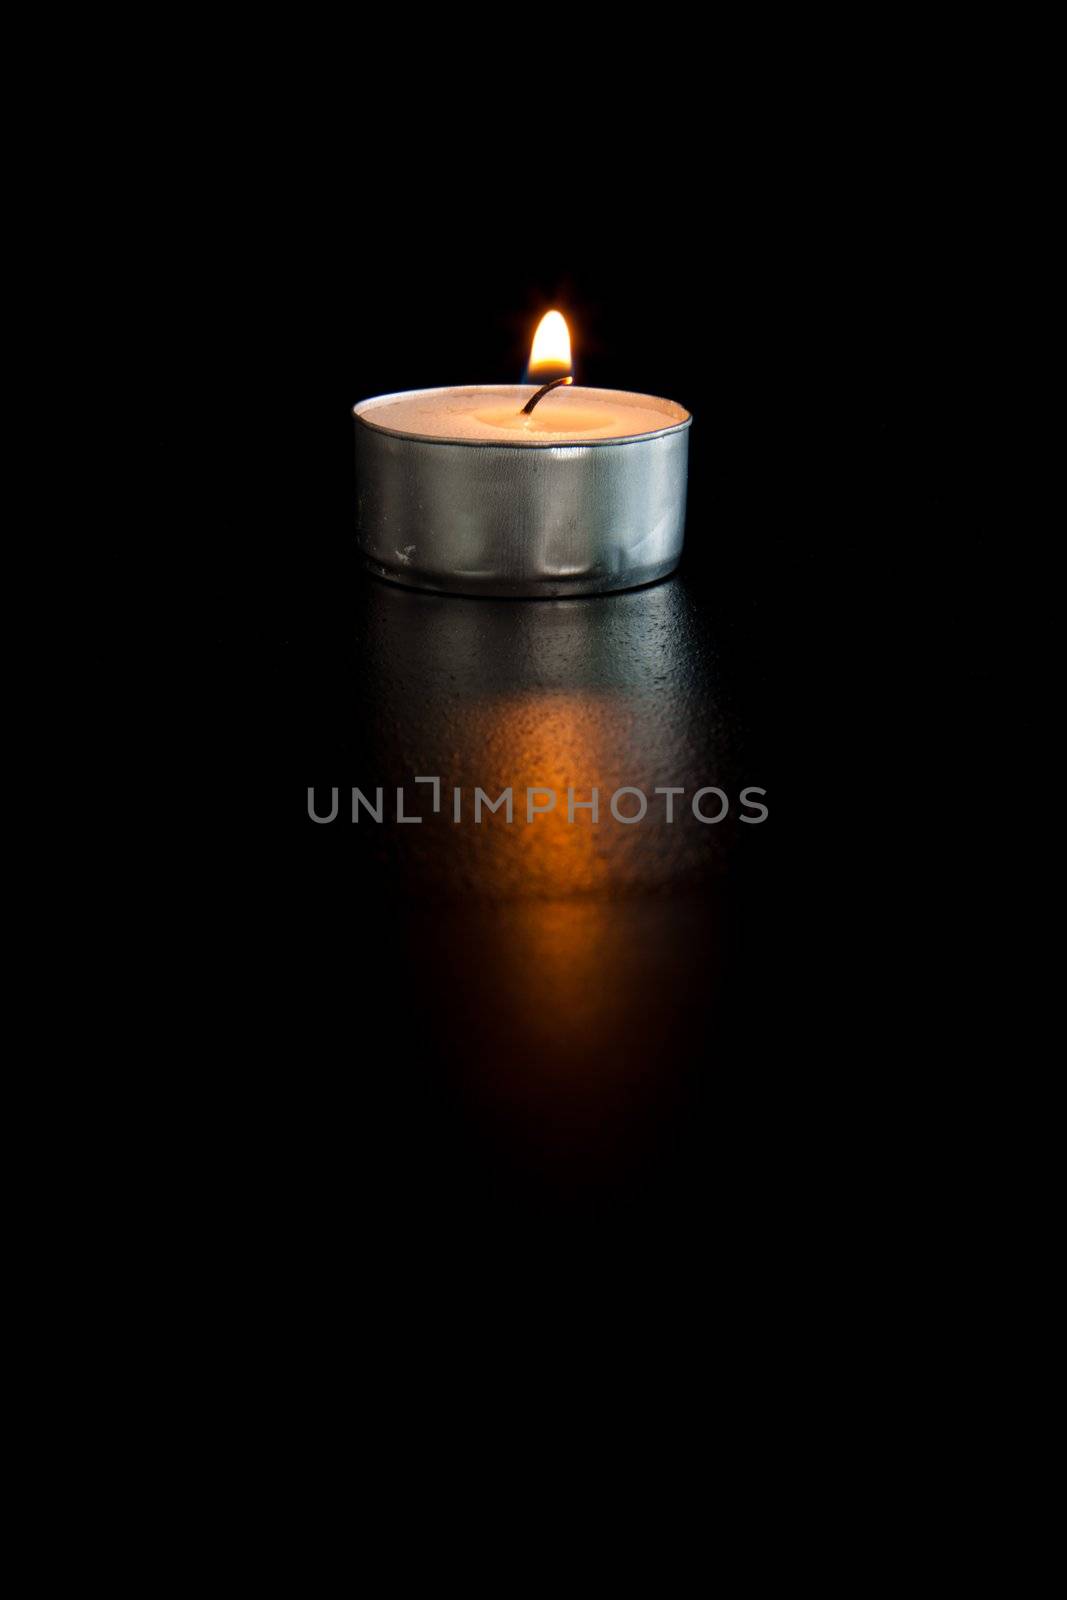 Lightened tea candle against a black background